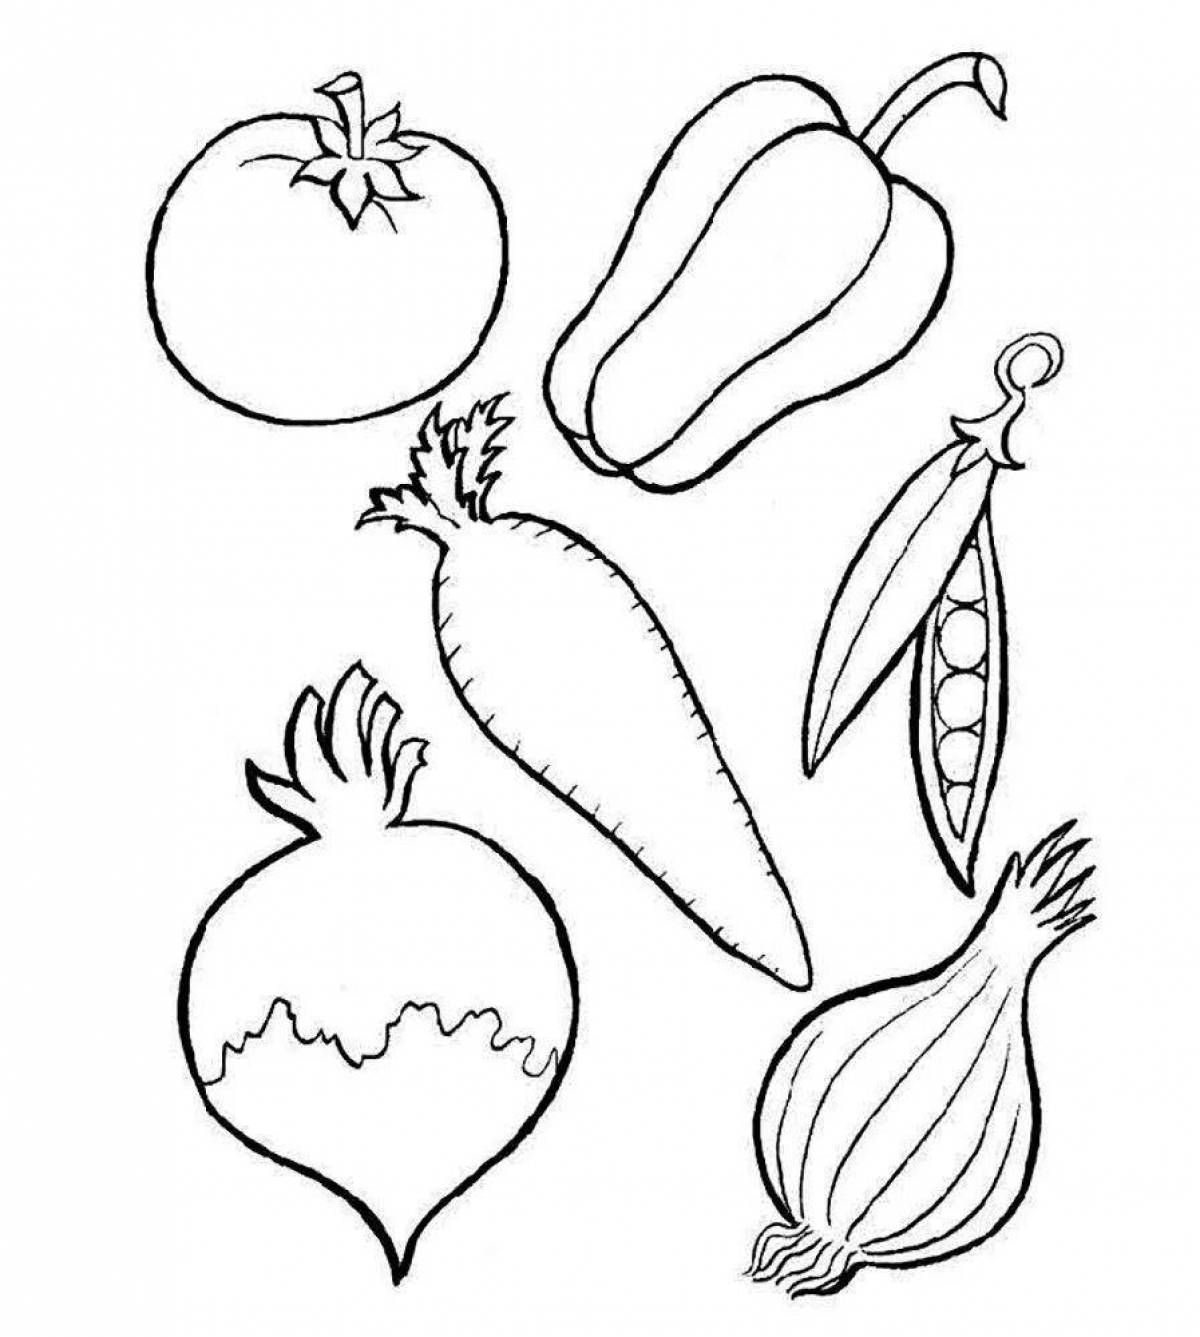 Delightful vegetable coloring book for beginners